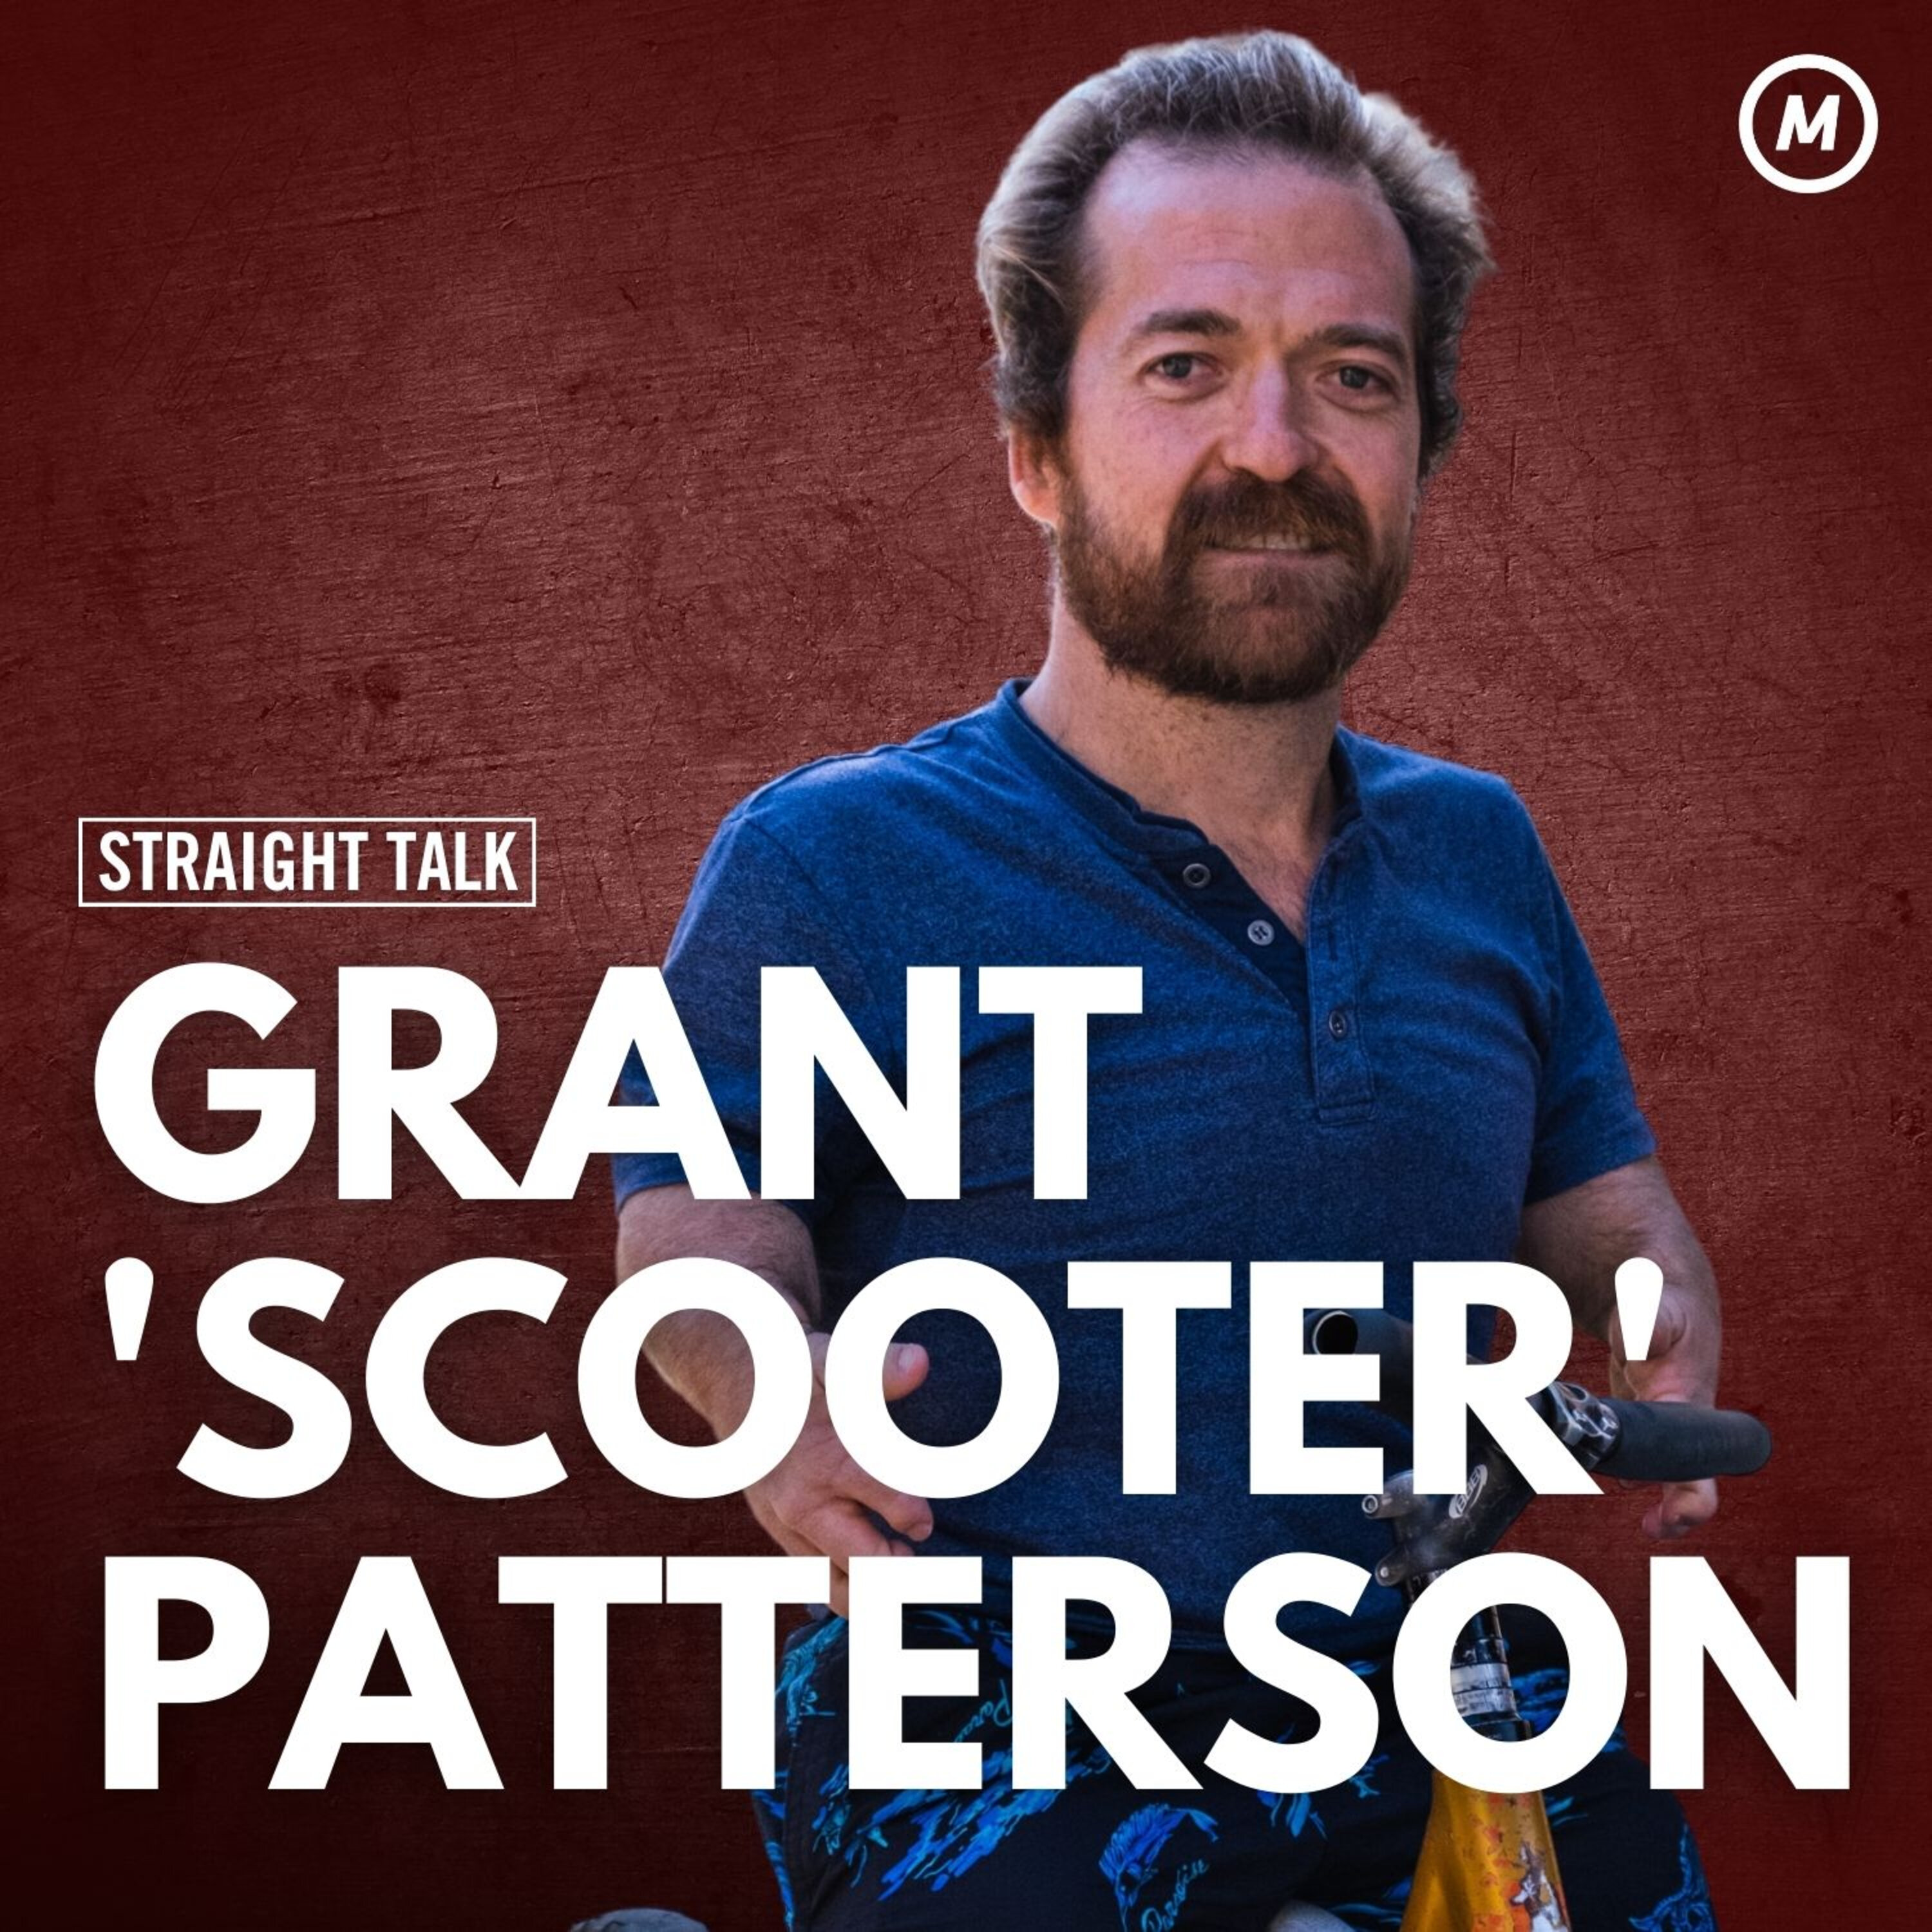 #39 Life is short so live it to its fullest with Grant ”Scooter” Patterson